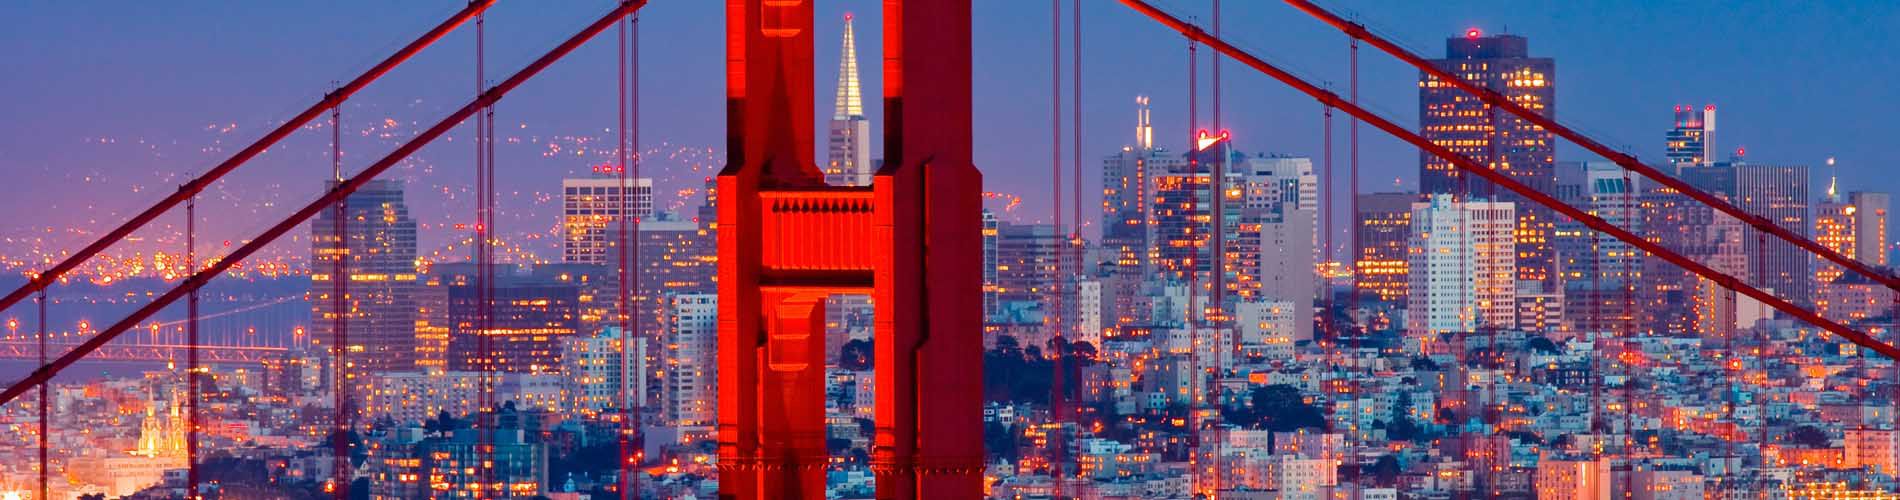 A skyline view of downtown San Francisco and the Golden Gate Bridge.